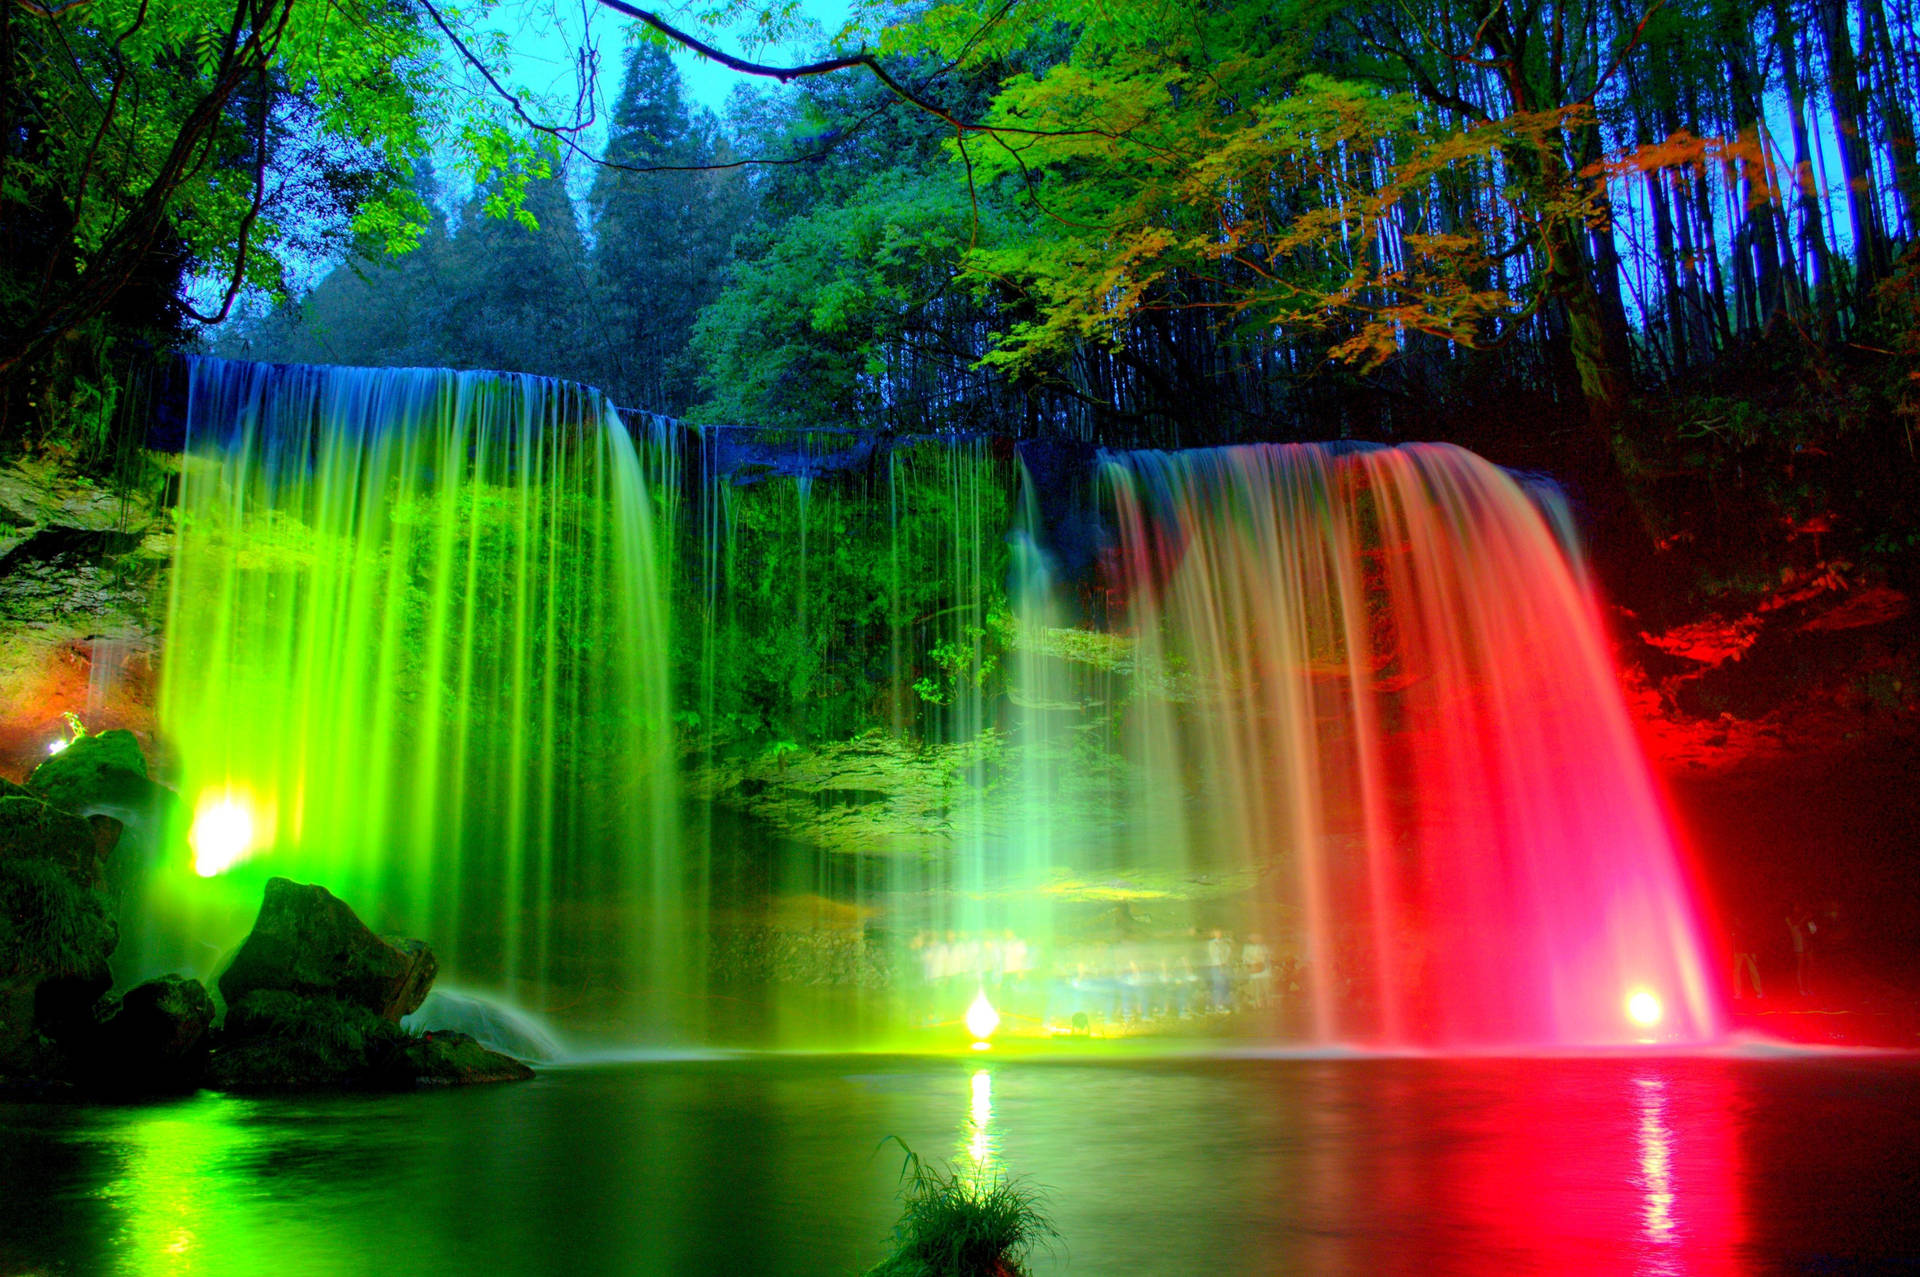 Spectacular rainbow seen through the cascading waters of a majestic waterfall Wallpaper